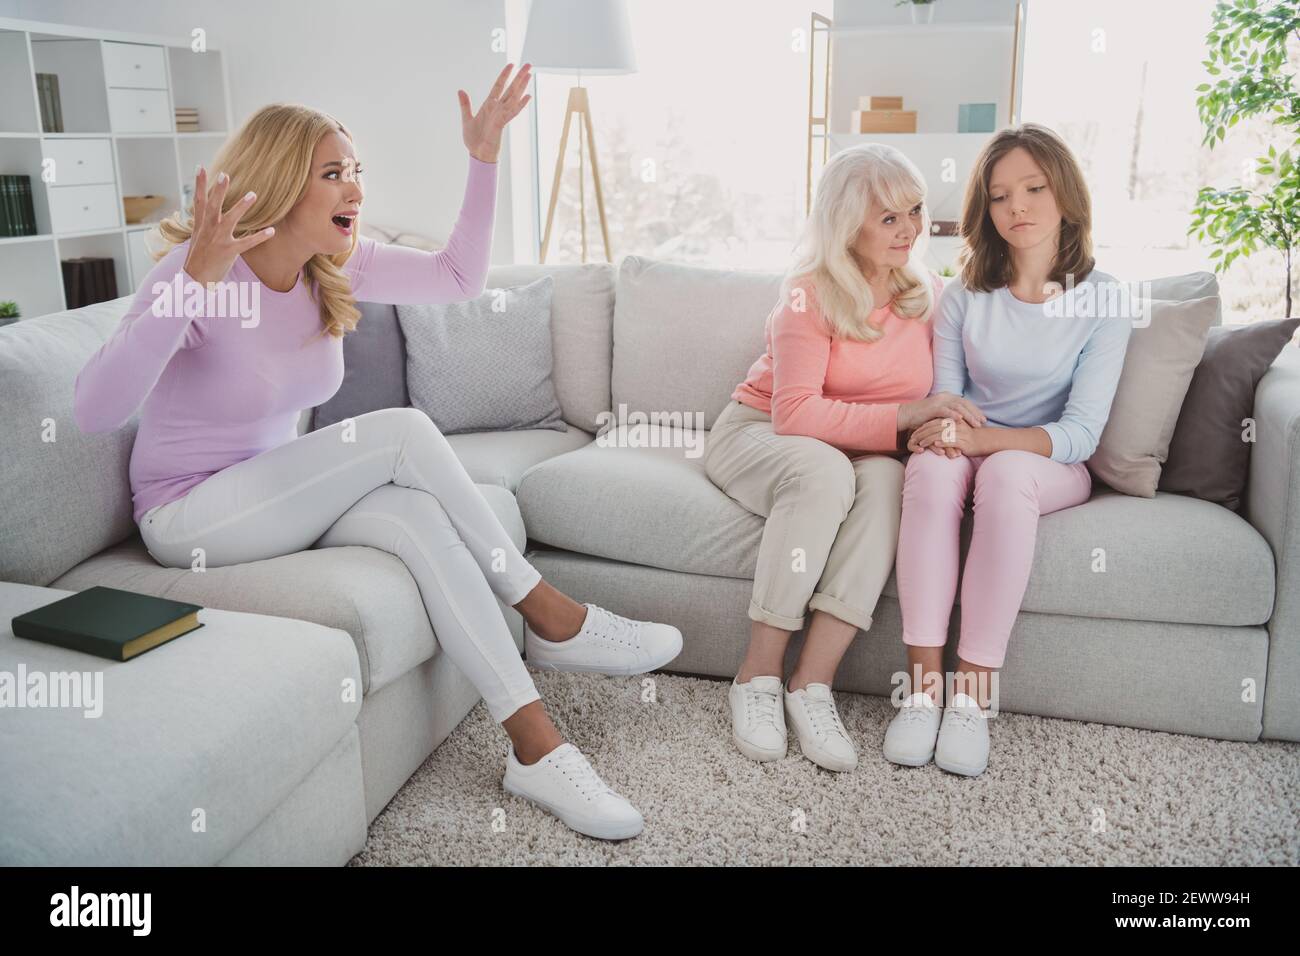 Photo portrait of granny caring about sad granddaughter sitting near angry daughter arguing misunderstanding Stock Photo